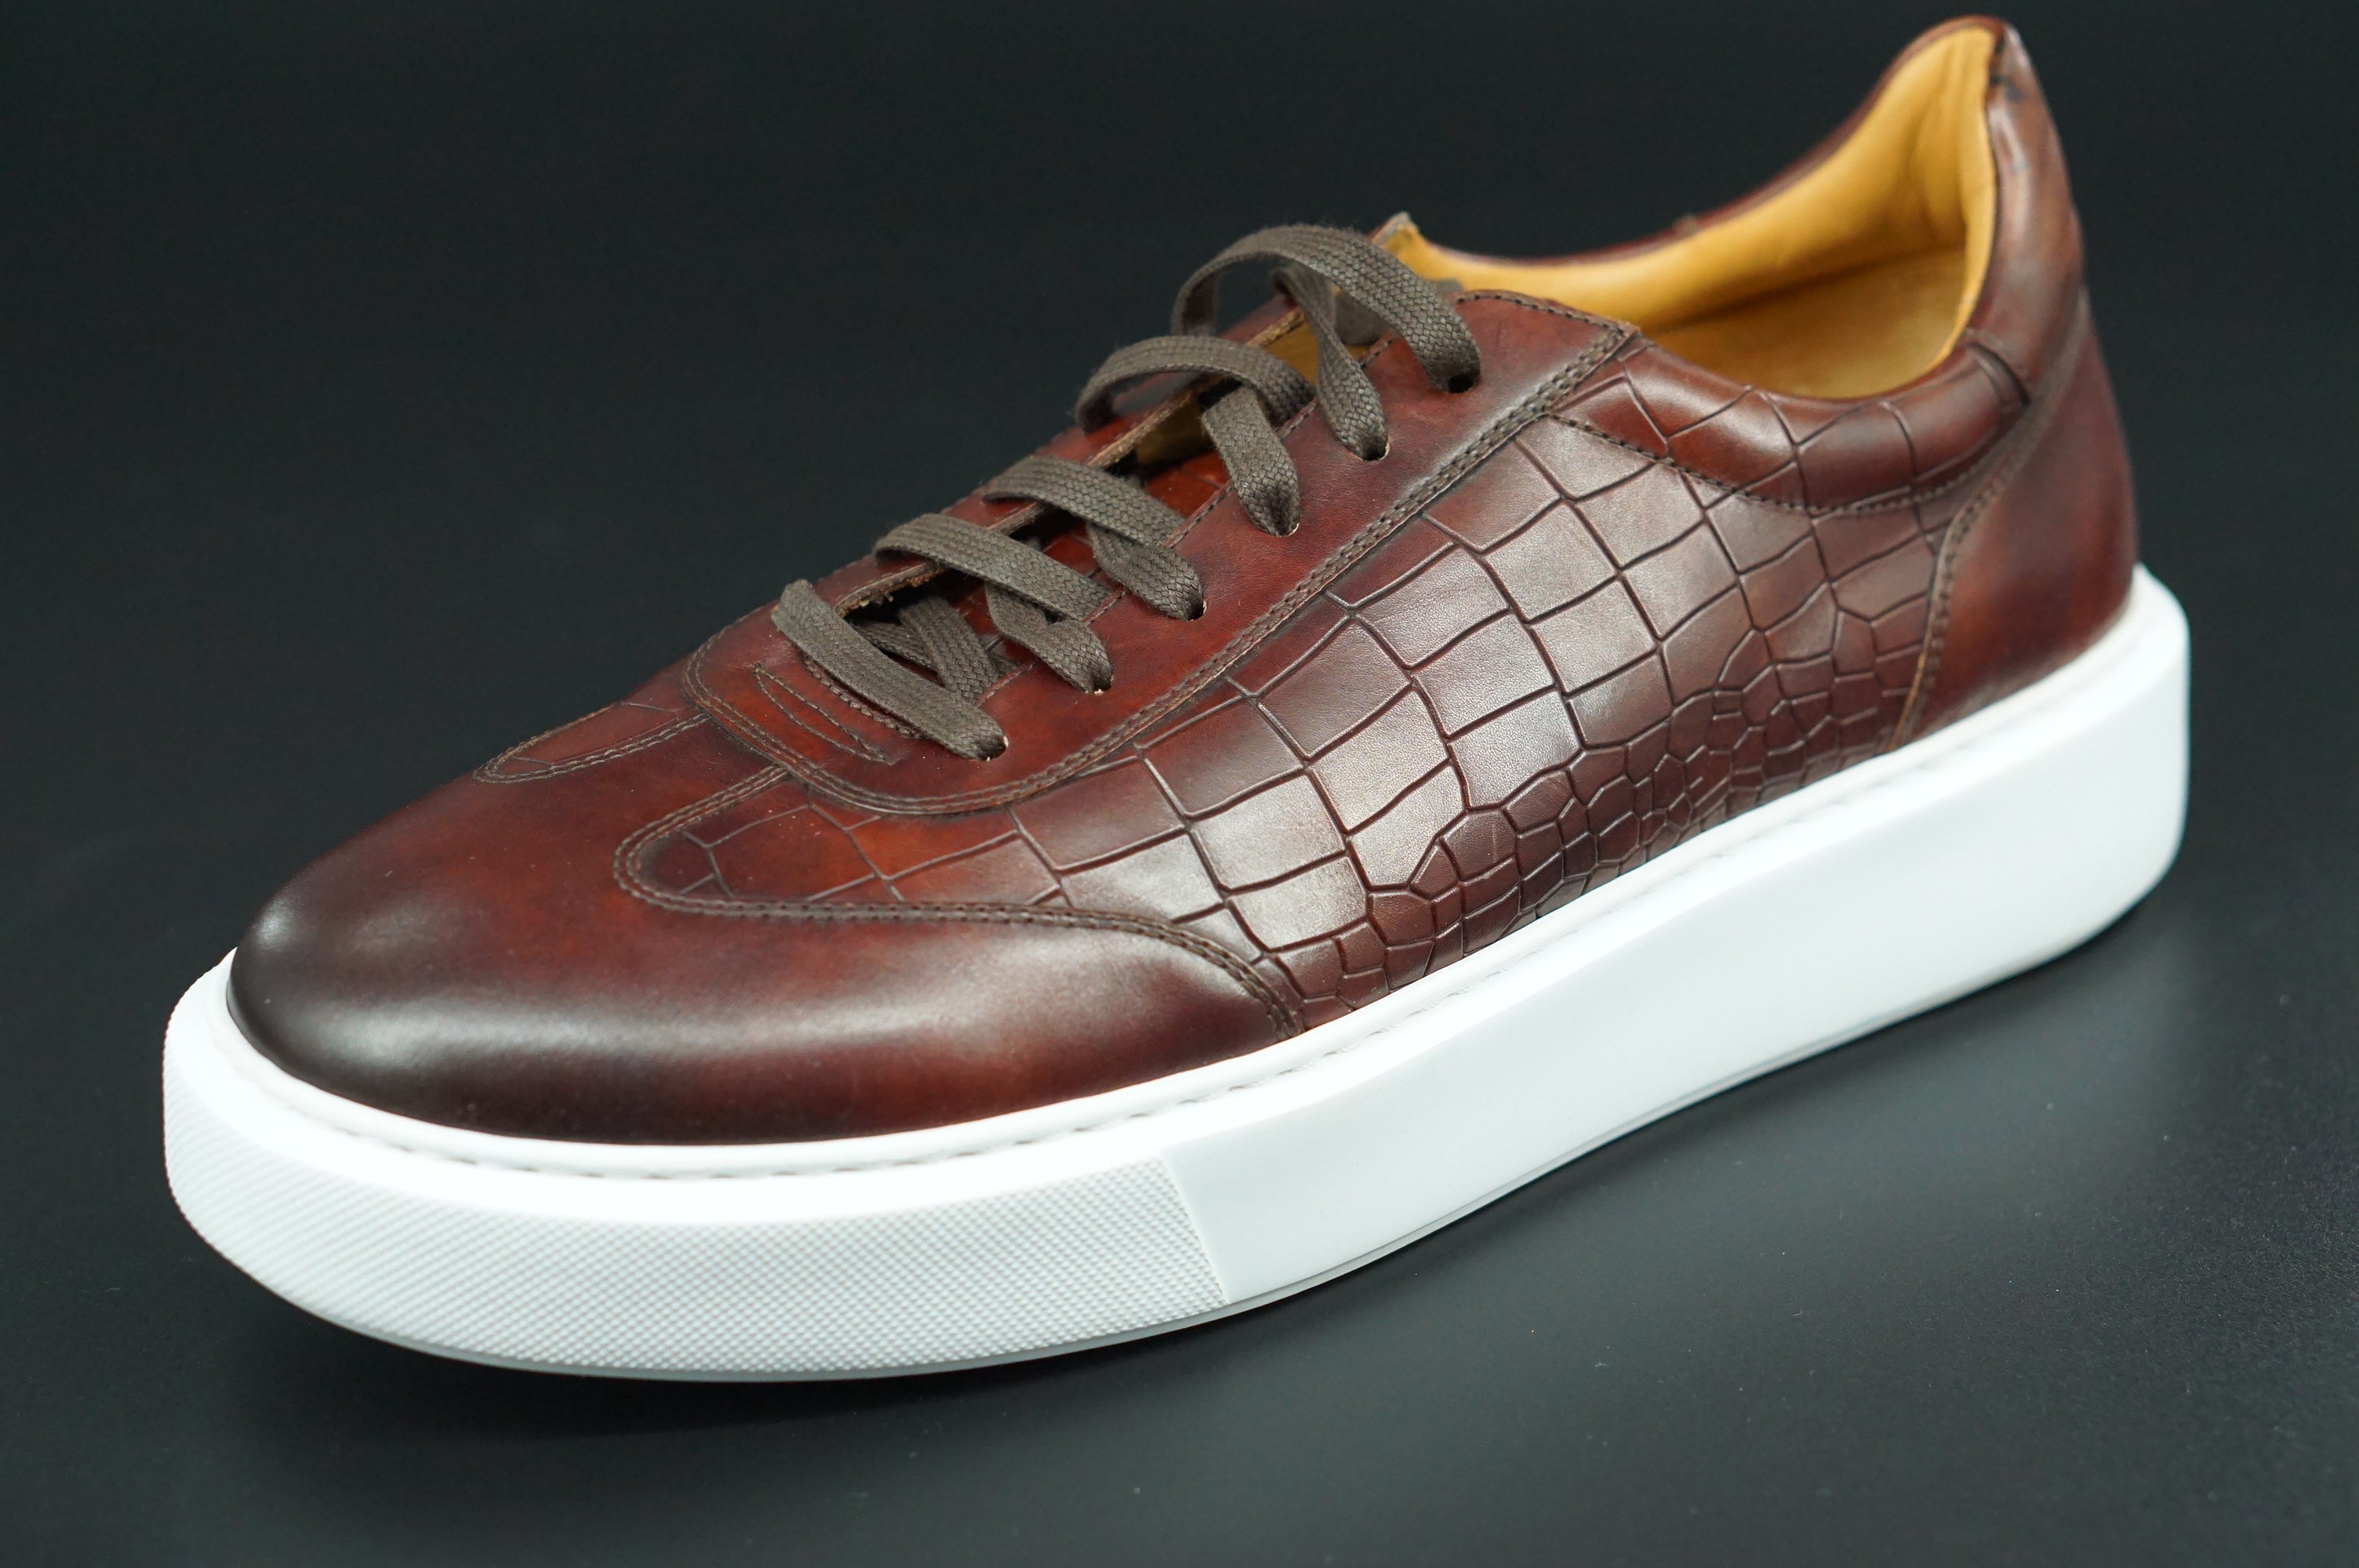 Magnanni Mino Mid Brown Alilgator Leather Low Top Sneaker SZ 11 New lace up